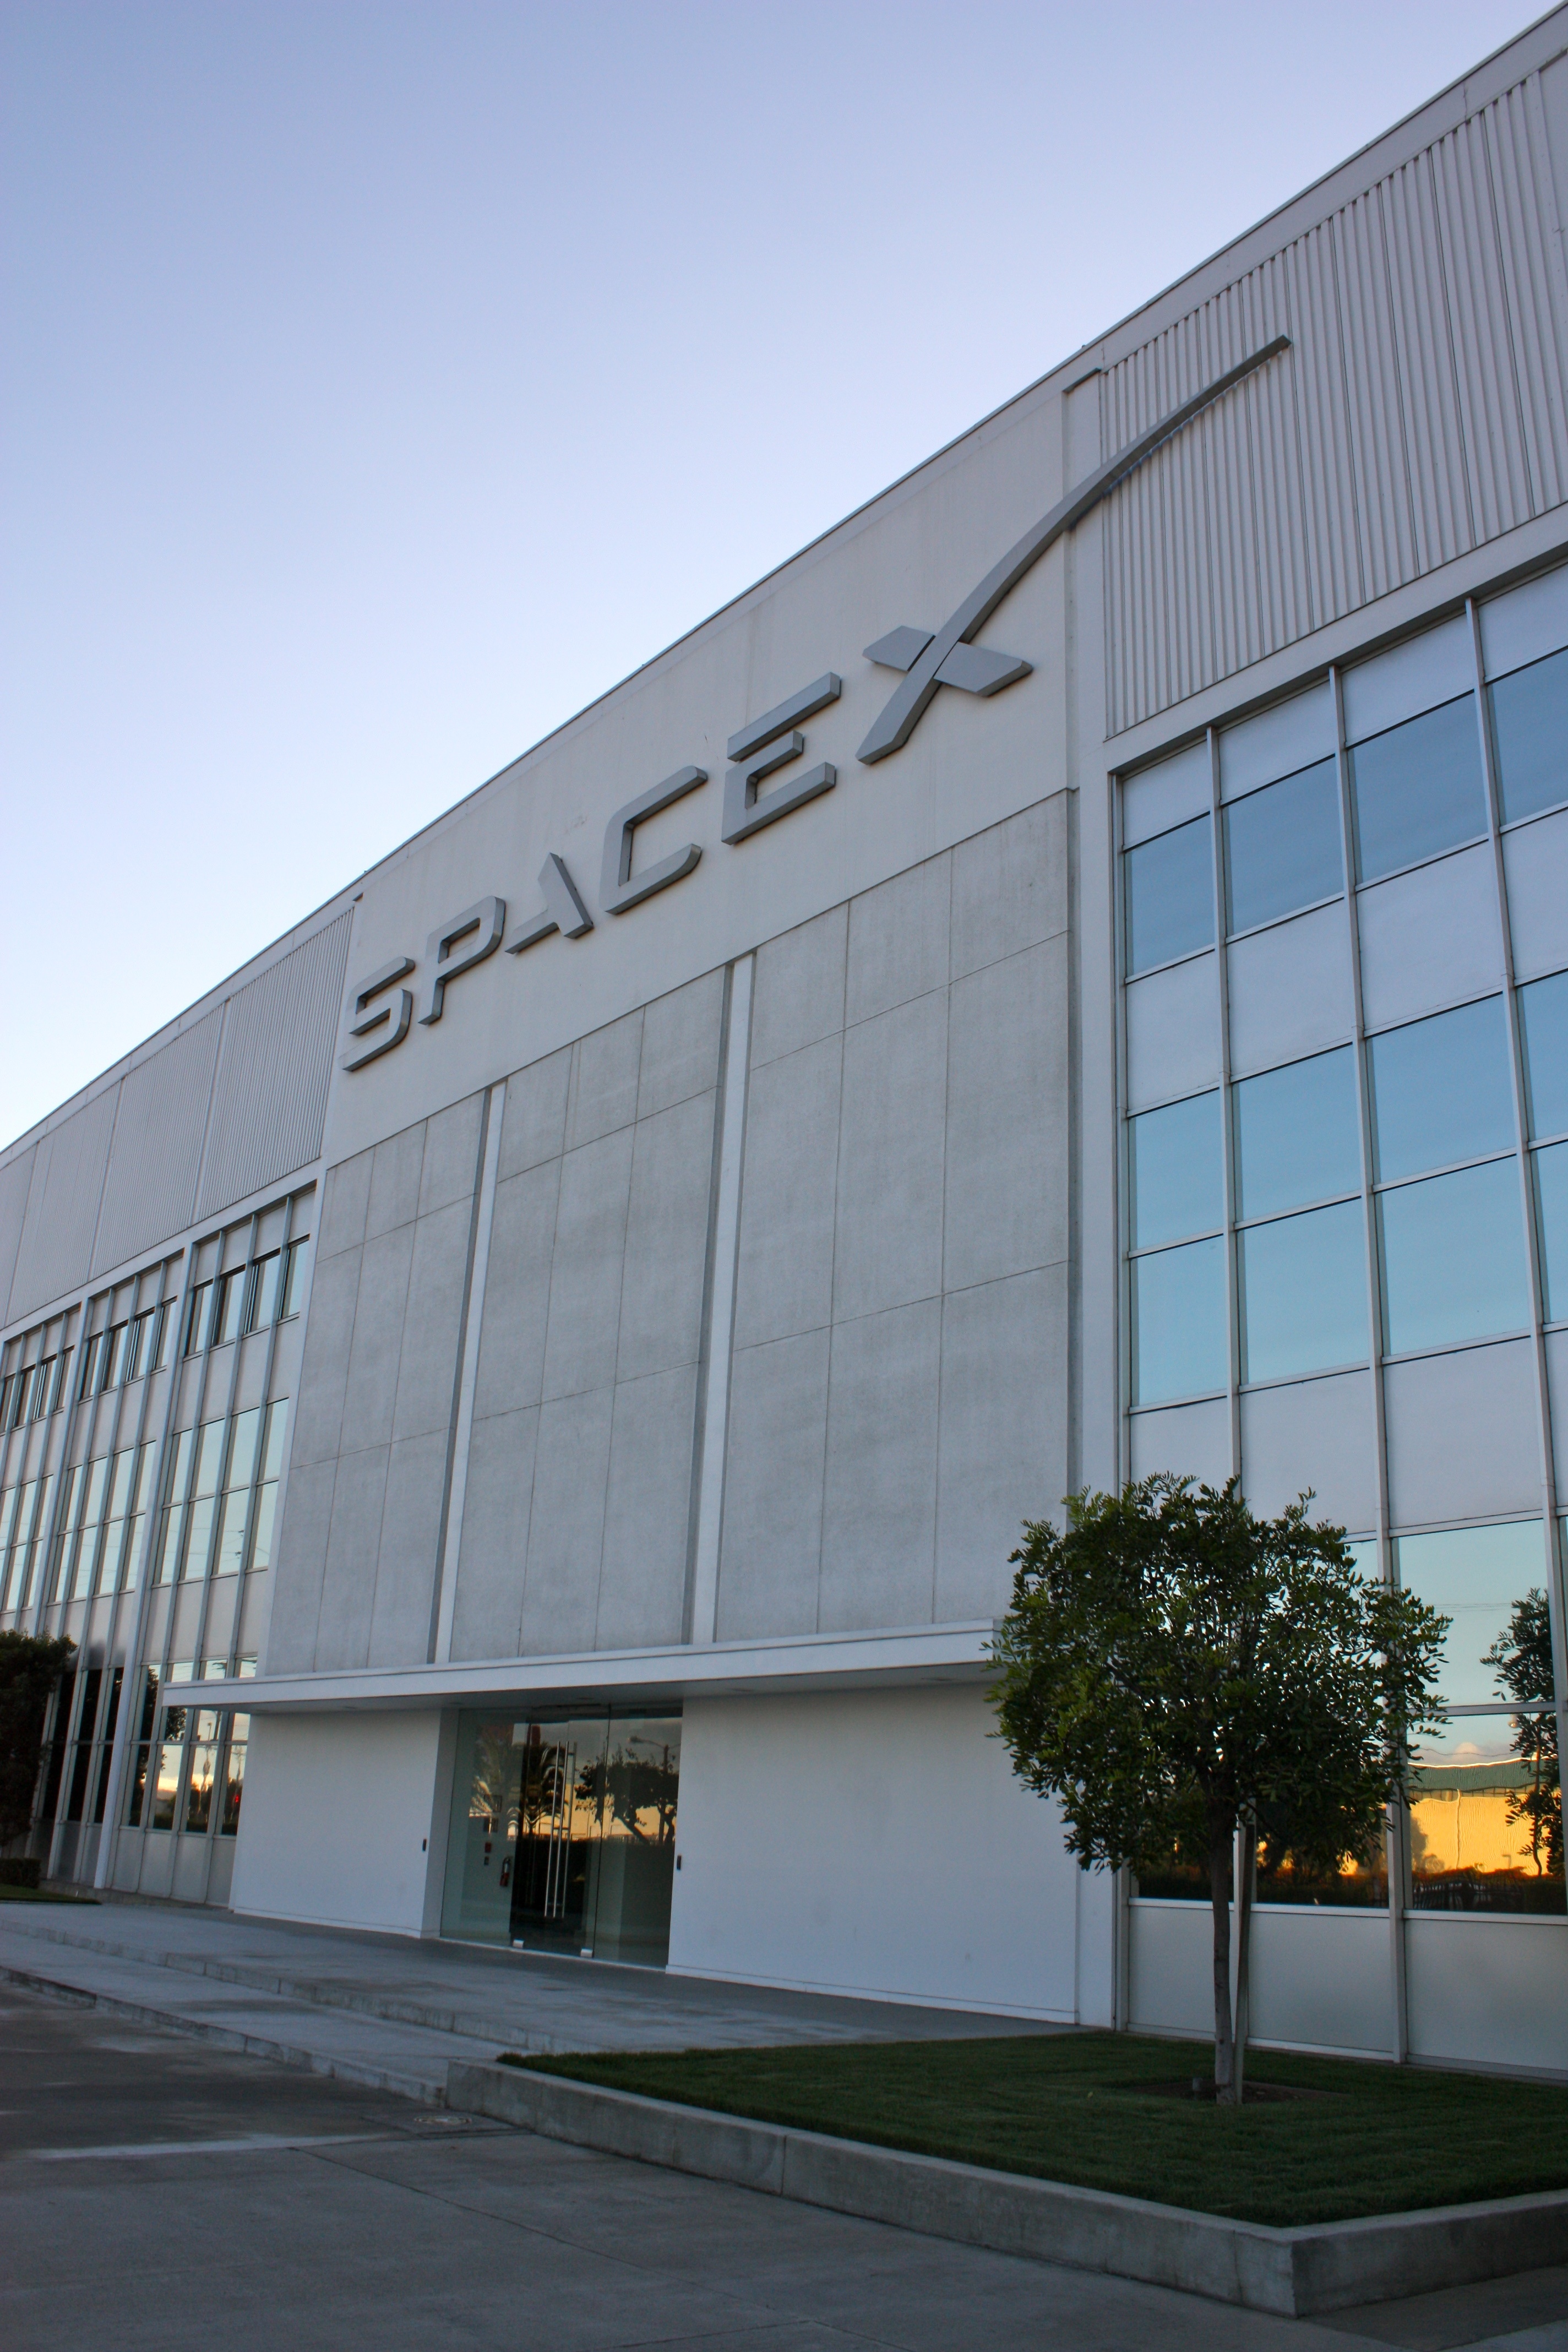 Entrance to SpaceX headquarters